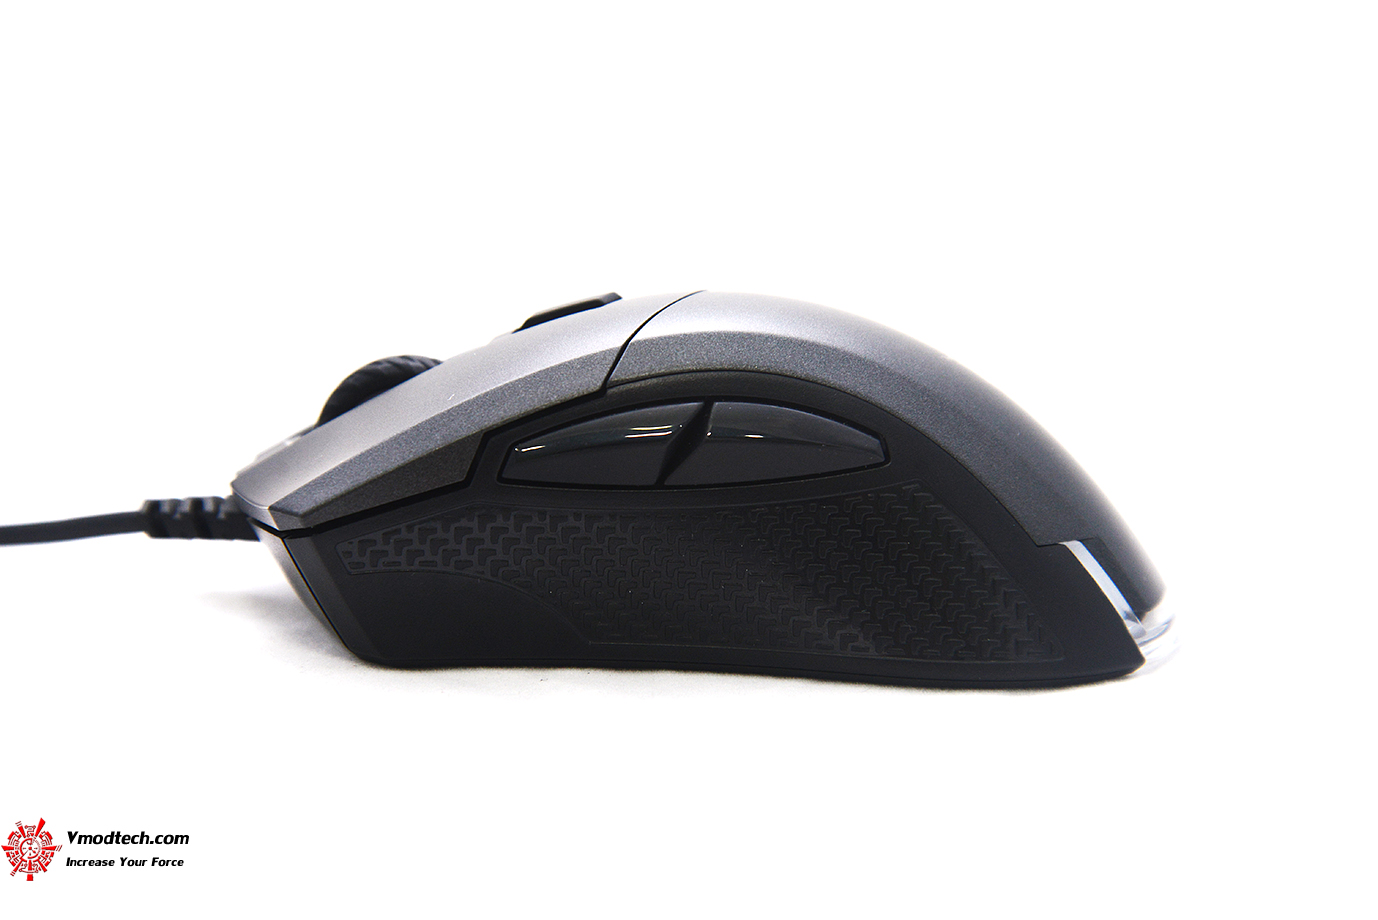 dsc 4921 MSI CLUTCH GM50 GAMING MOUSE REVIEW